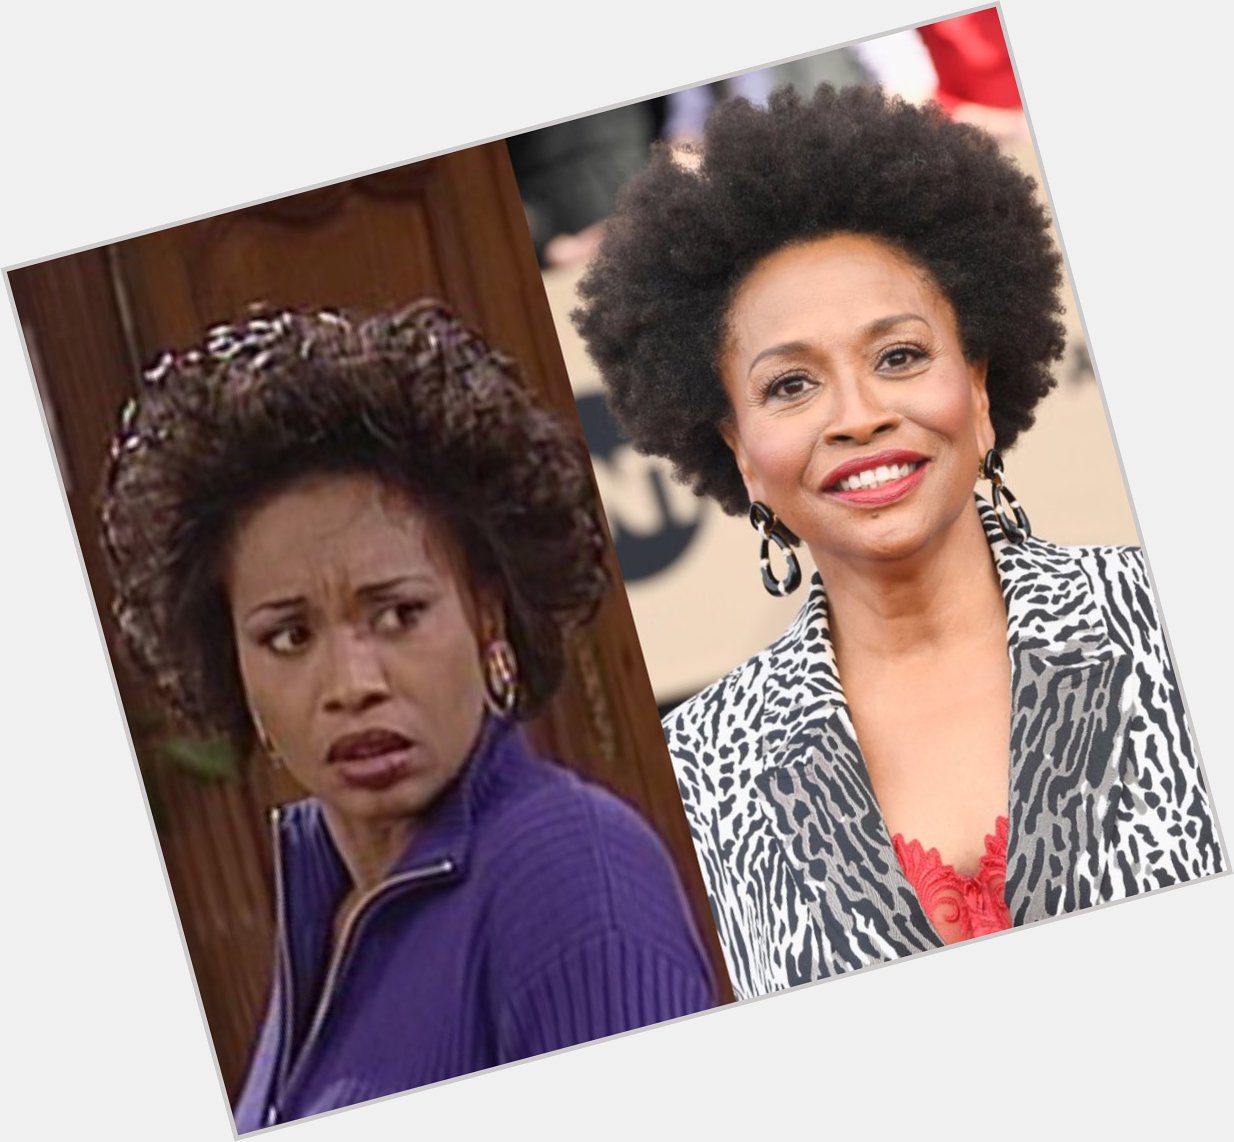 January 25, 1957 Happy Birthday to actress & singer Jenifer Lewis who turns 61 today 